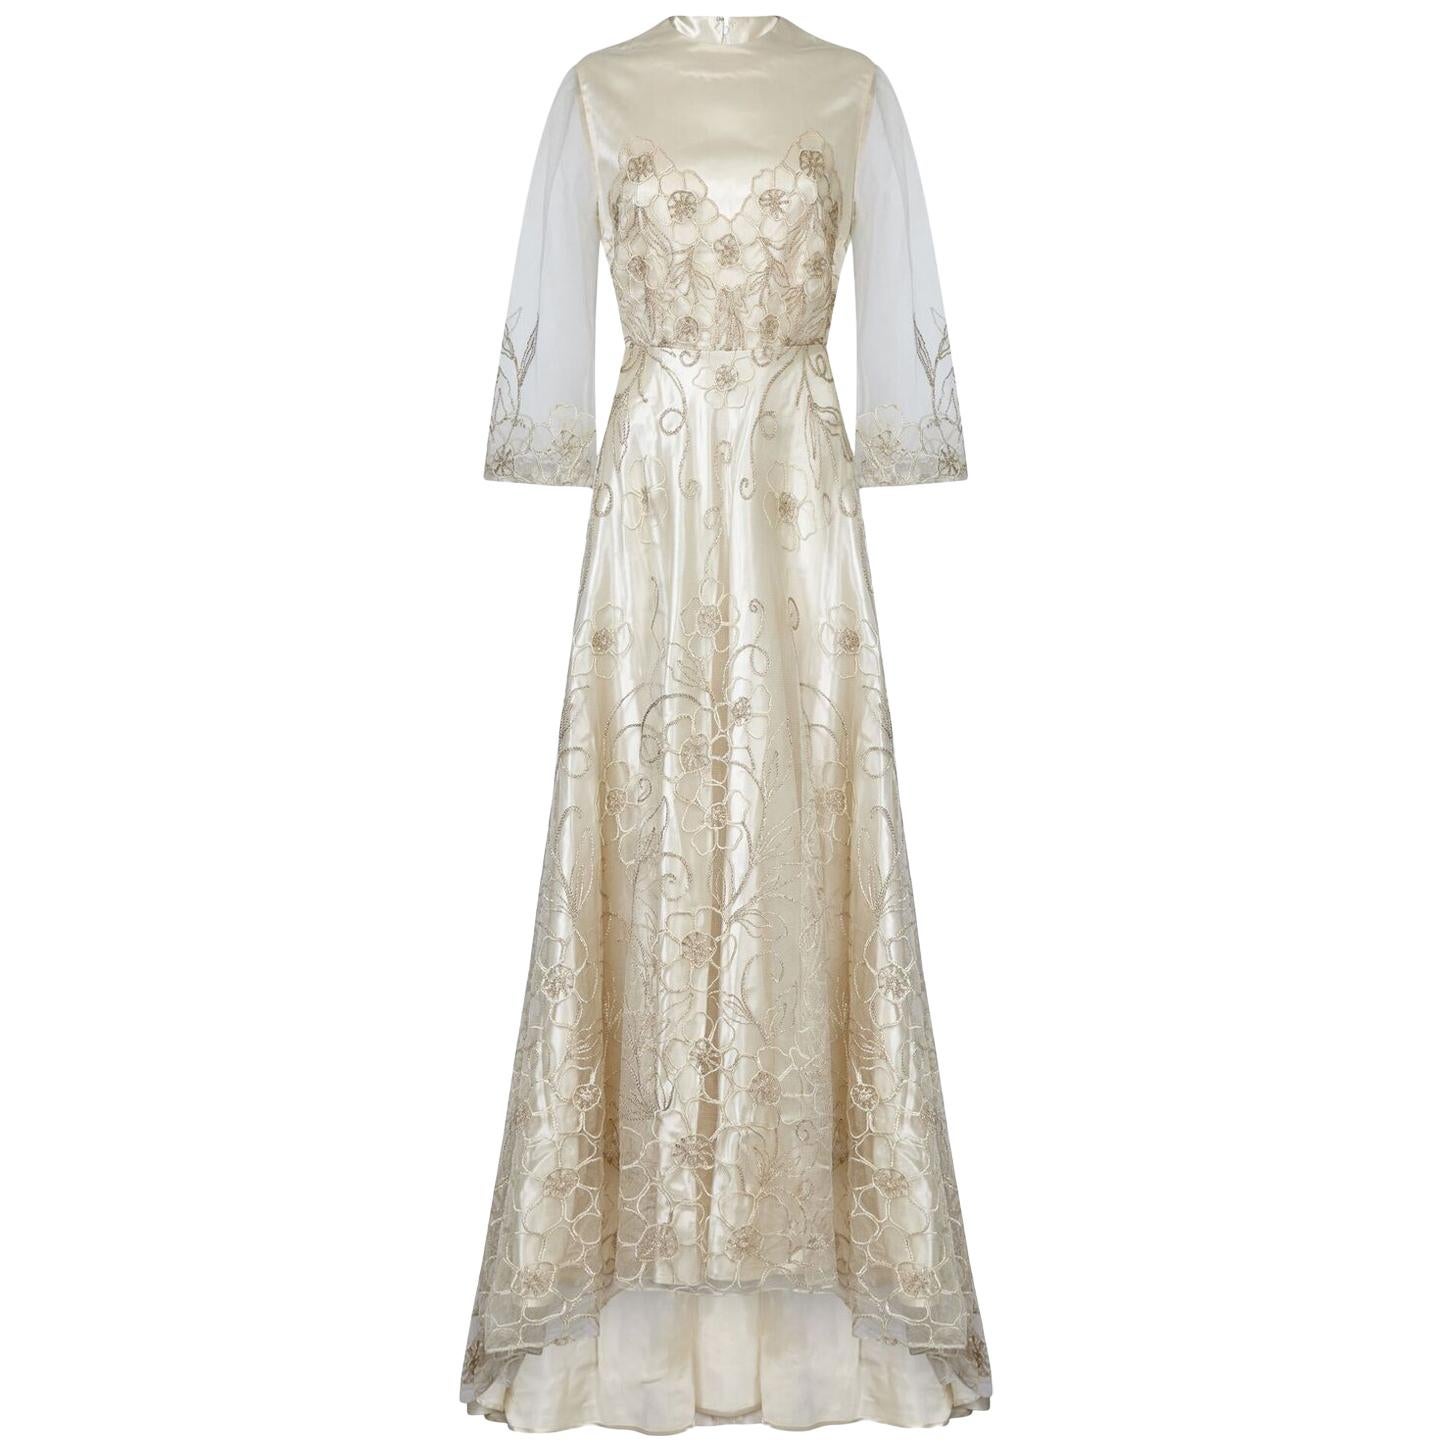 Late 1950s Ivory Wedding Dress With Delicate Embroidery Sold With Original Box